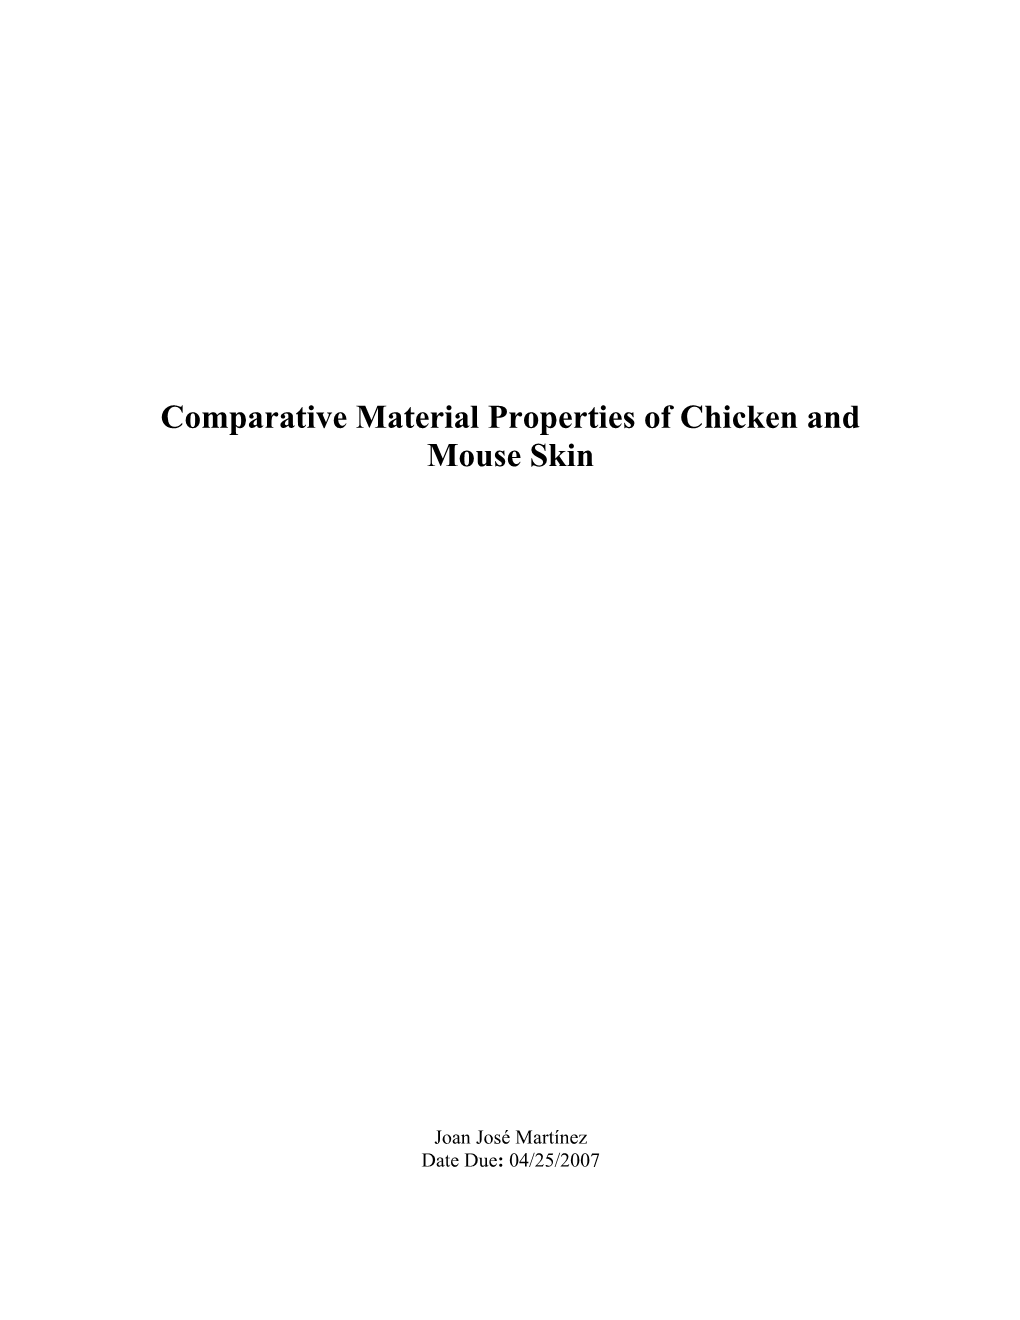 Title: Comparative Material Properties of Chicken and Mouse Skin